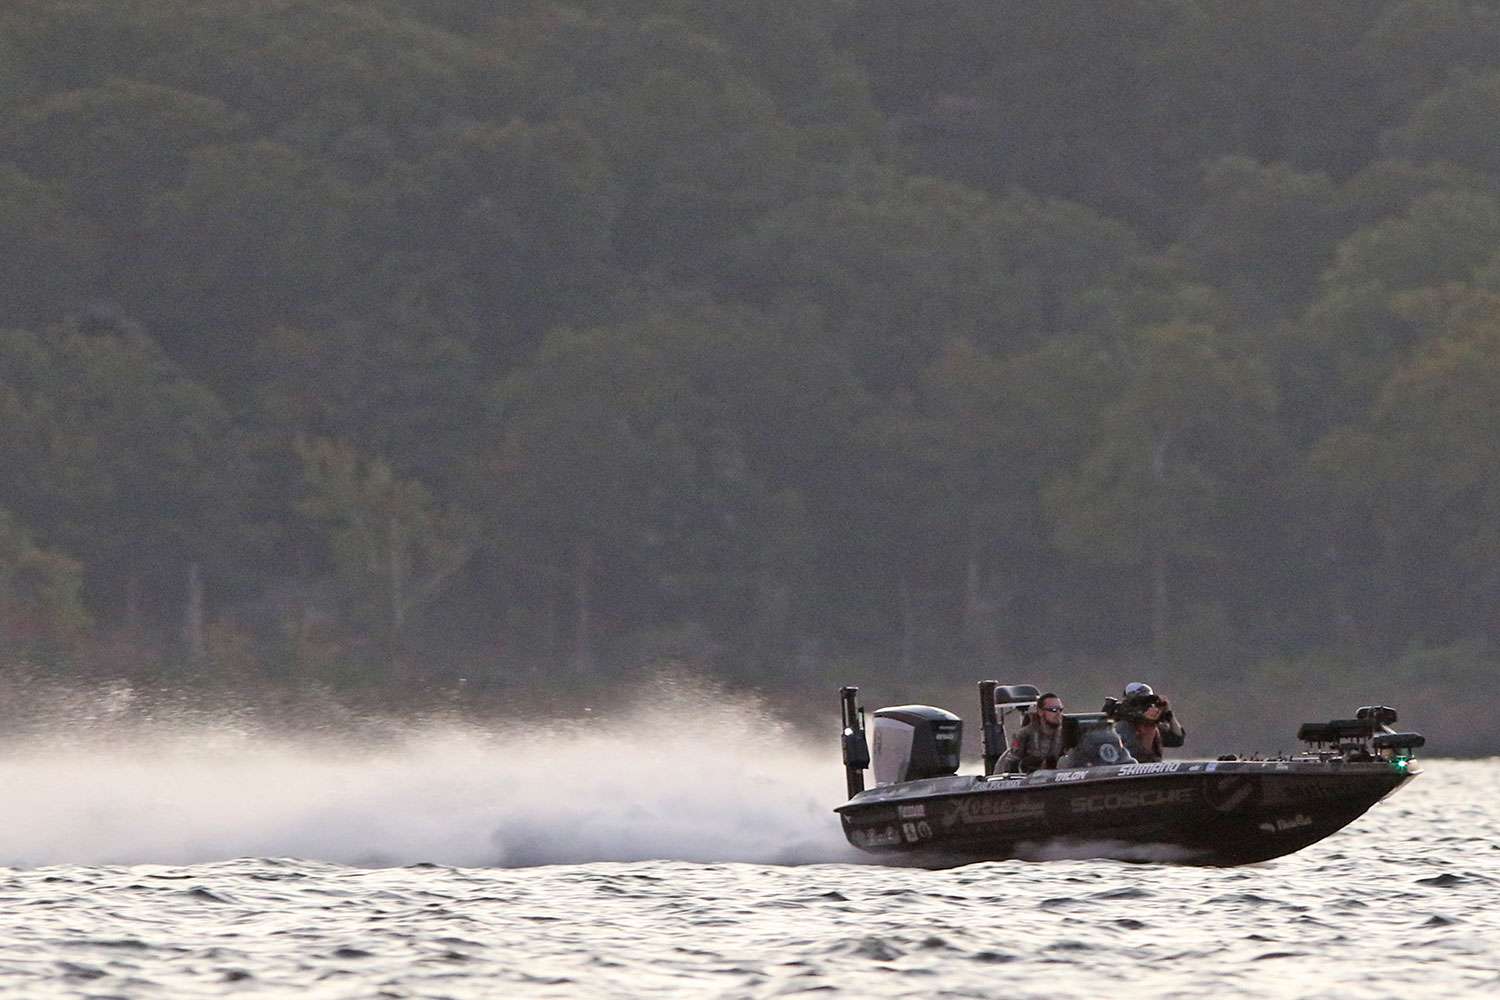 On the day of 35th year, Carl Jocumsen hammered a giant bag of bass during Championship Sunday of the 2019 Cherokee Casino Tahlequah Bassmaster Elite at Lake Tenkiller.